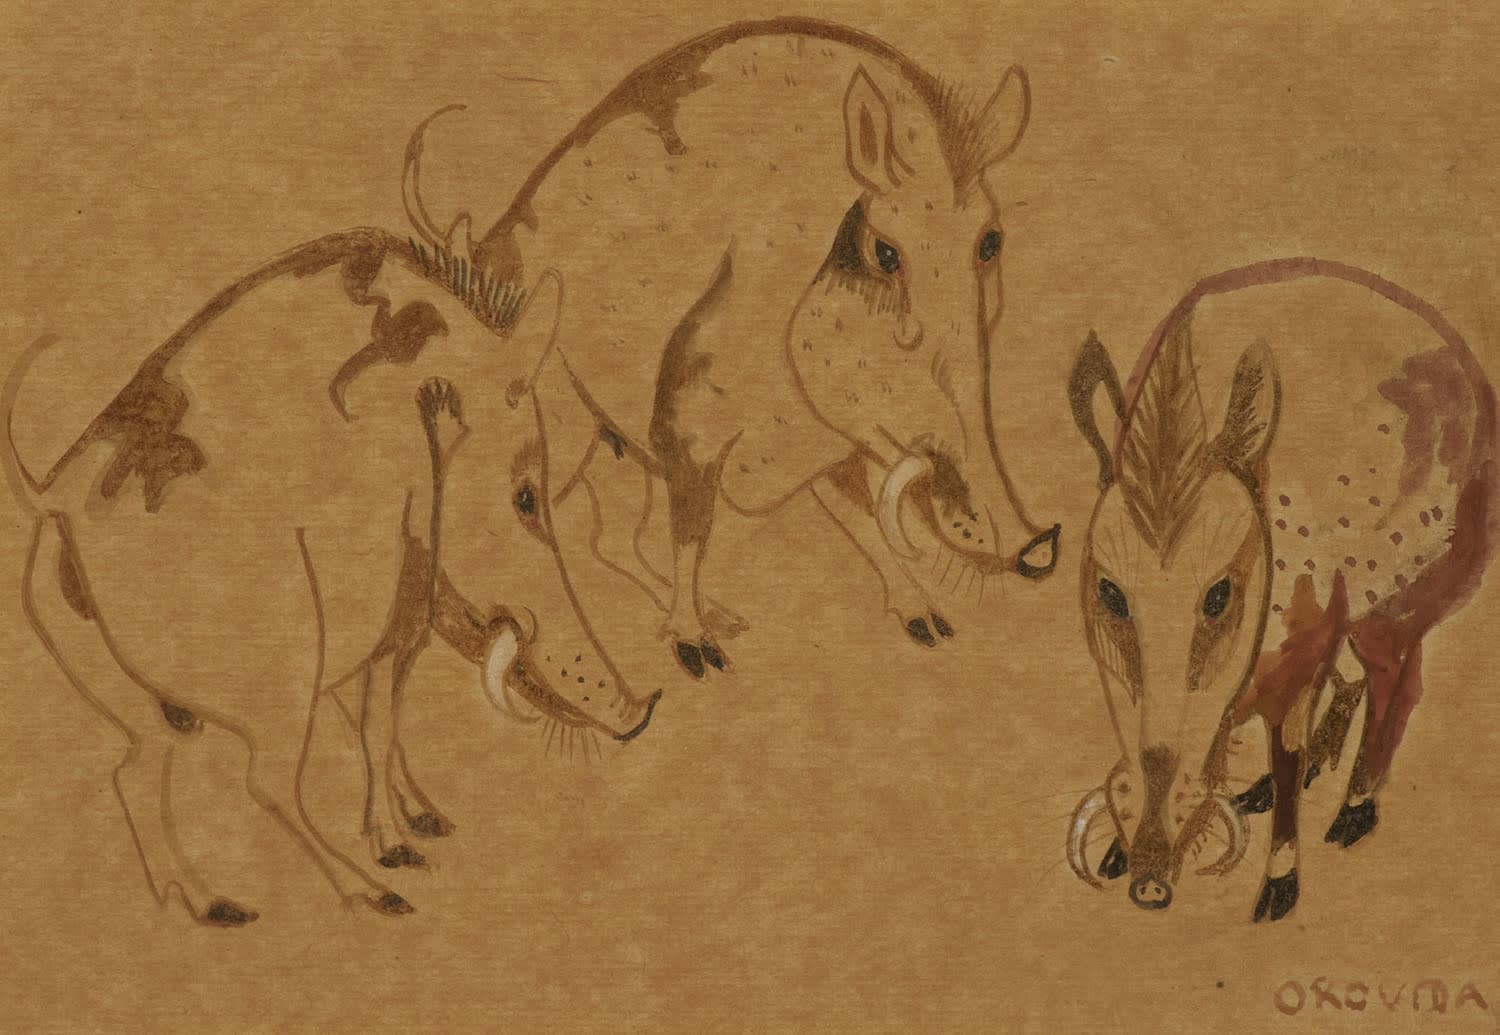 Orovida Pissarro (1893-1968) Warthogs c.1930 Watercolour, pen and ink on paper 12.5 x 18 cm Ben Uri Collection © Orovida Pissarro estate Bequest from James Colyer-Fergusson 2005 through the good offices of Art Fund